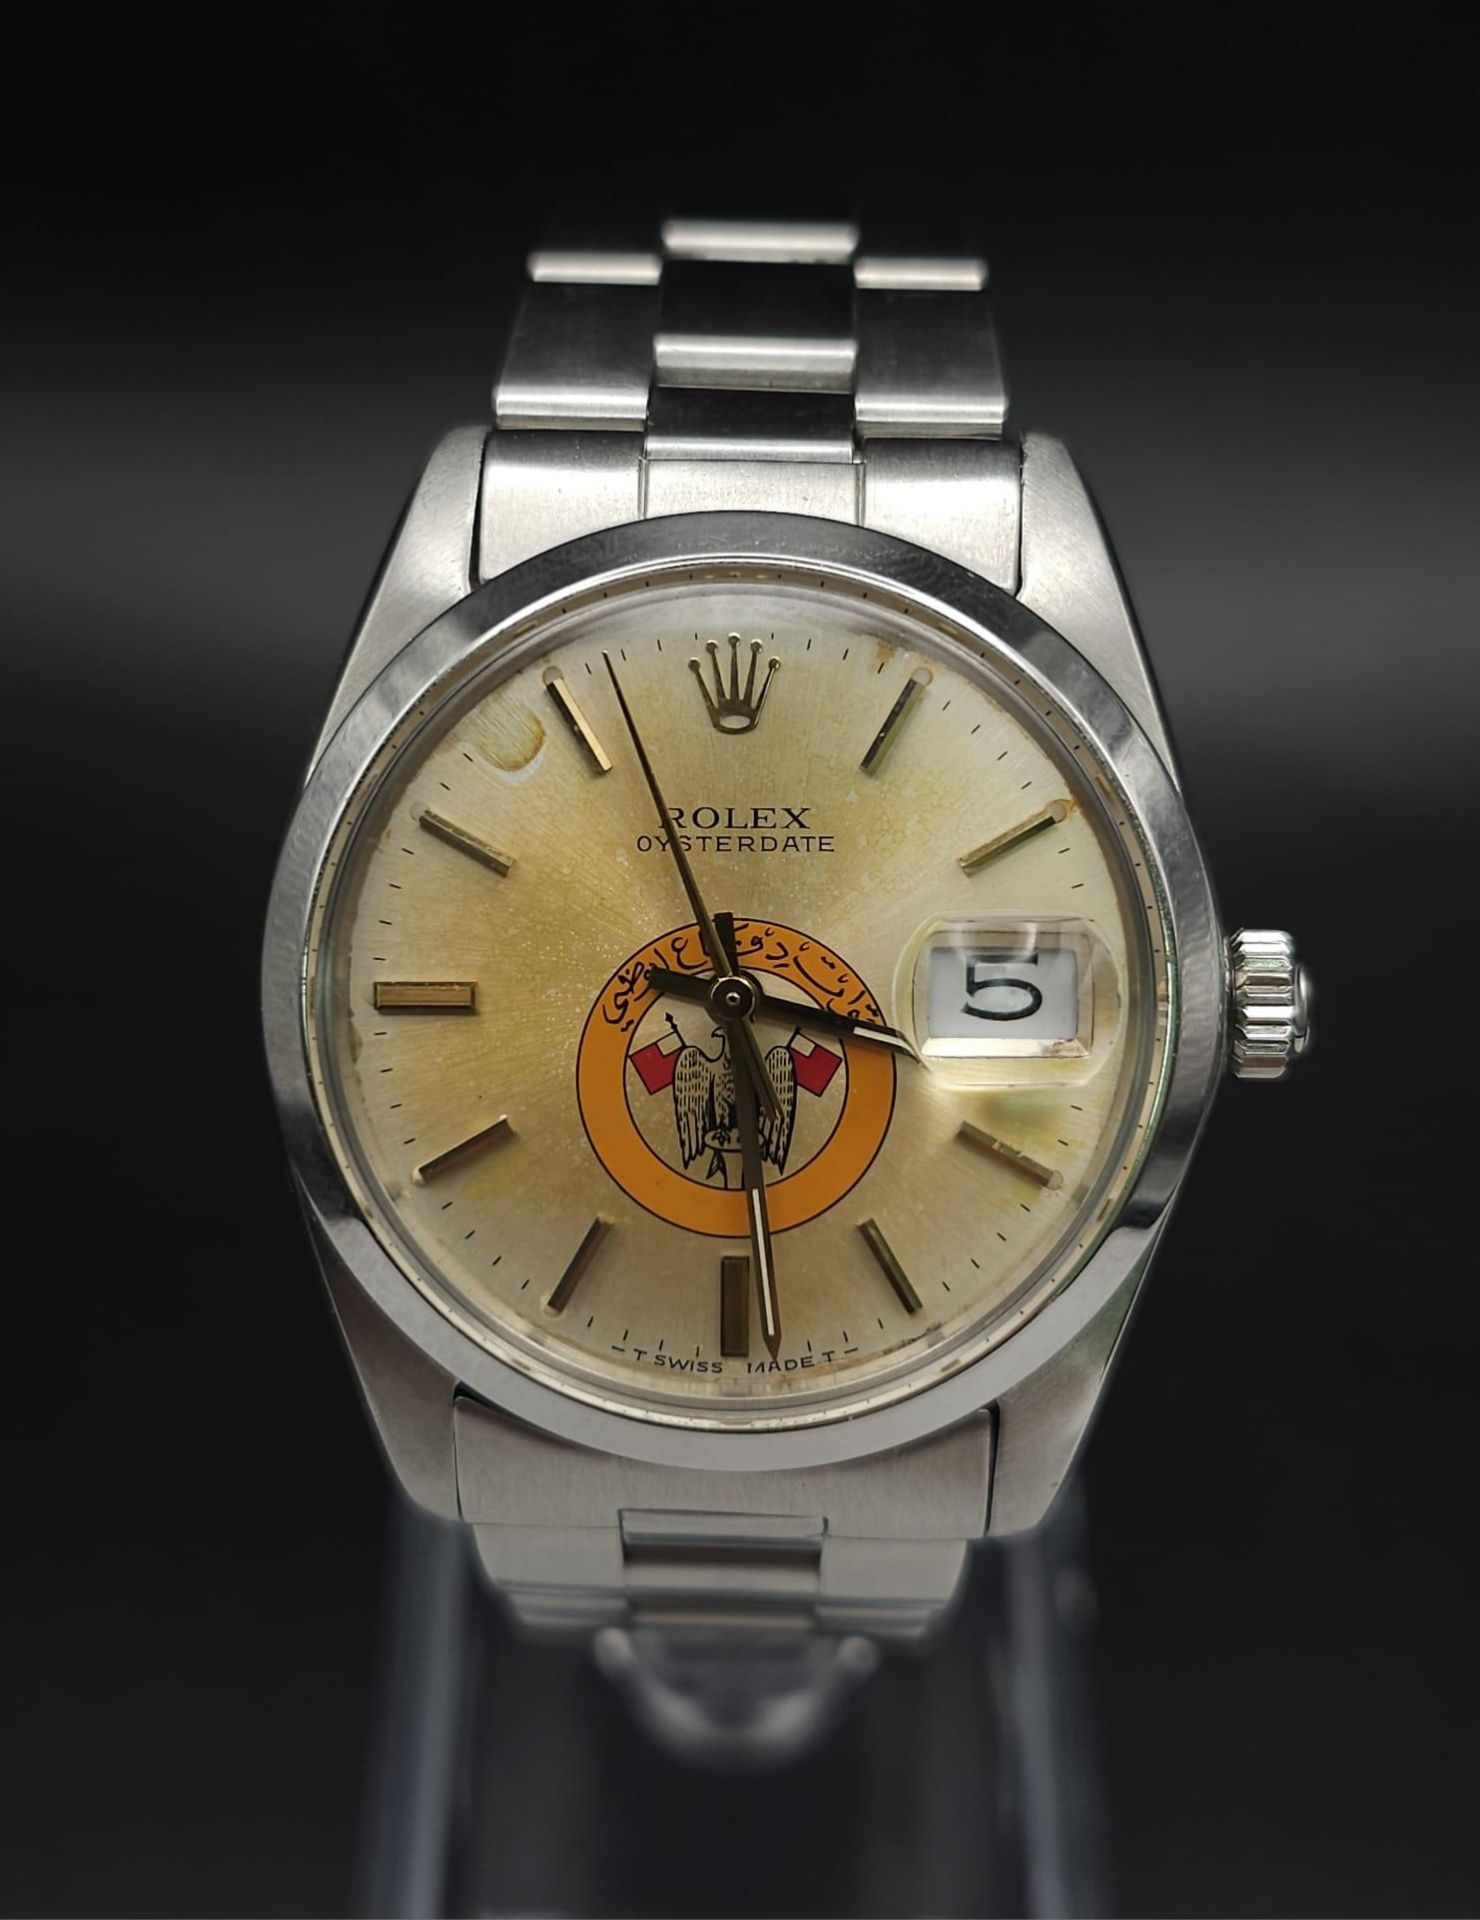 A ROLEX OYSTERDATE IN STAINLESS STEEL SPORTING THE EAGLE LOGO OF ABU DHABI .(DIAL NEEDS CLEANING) - Image 3 of 13